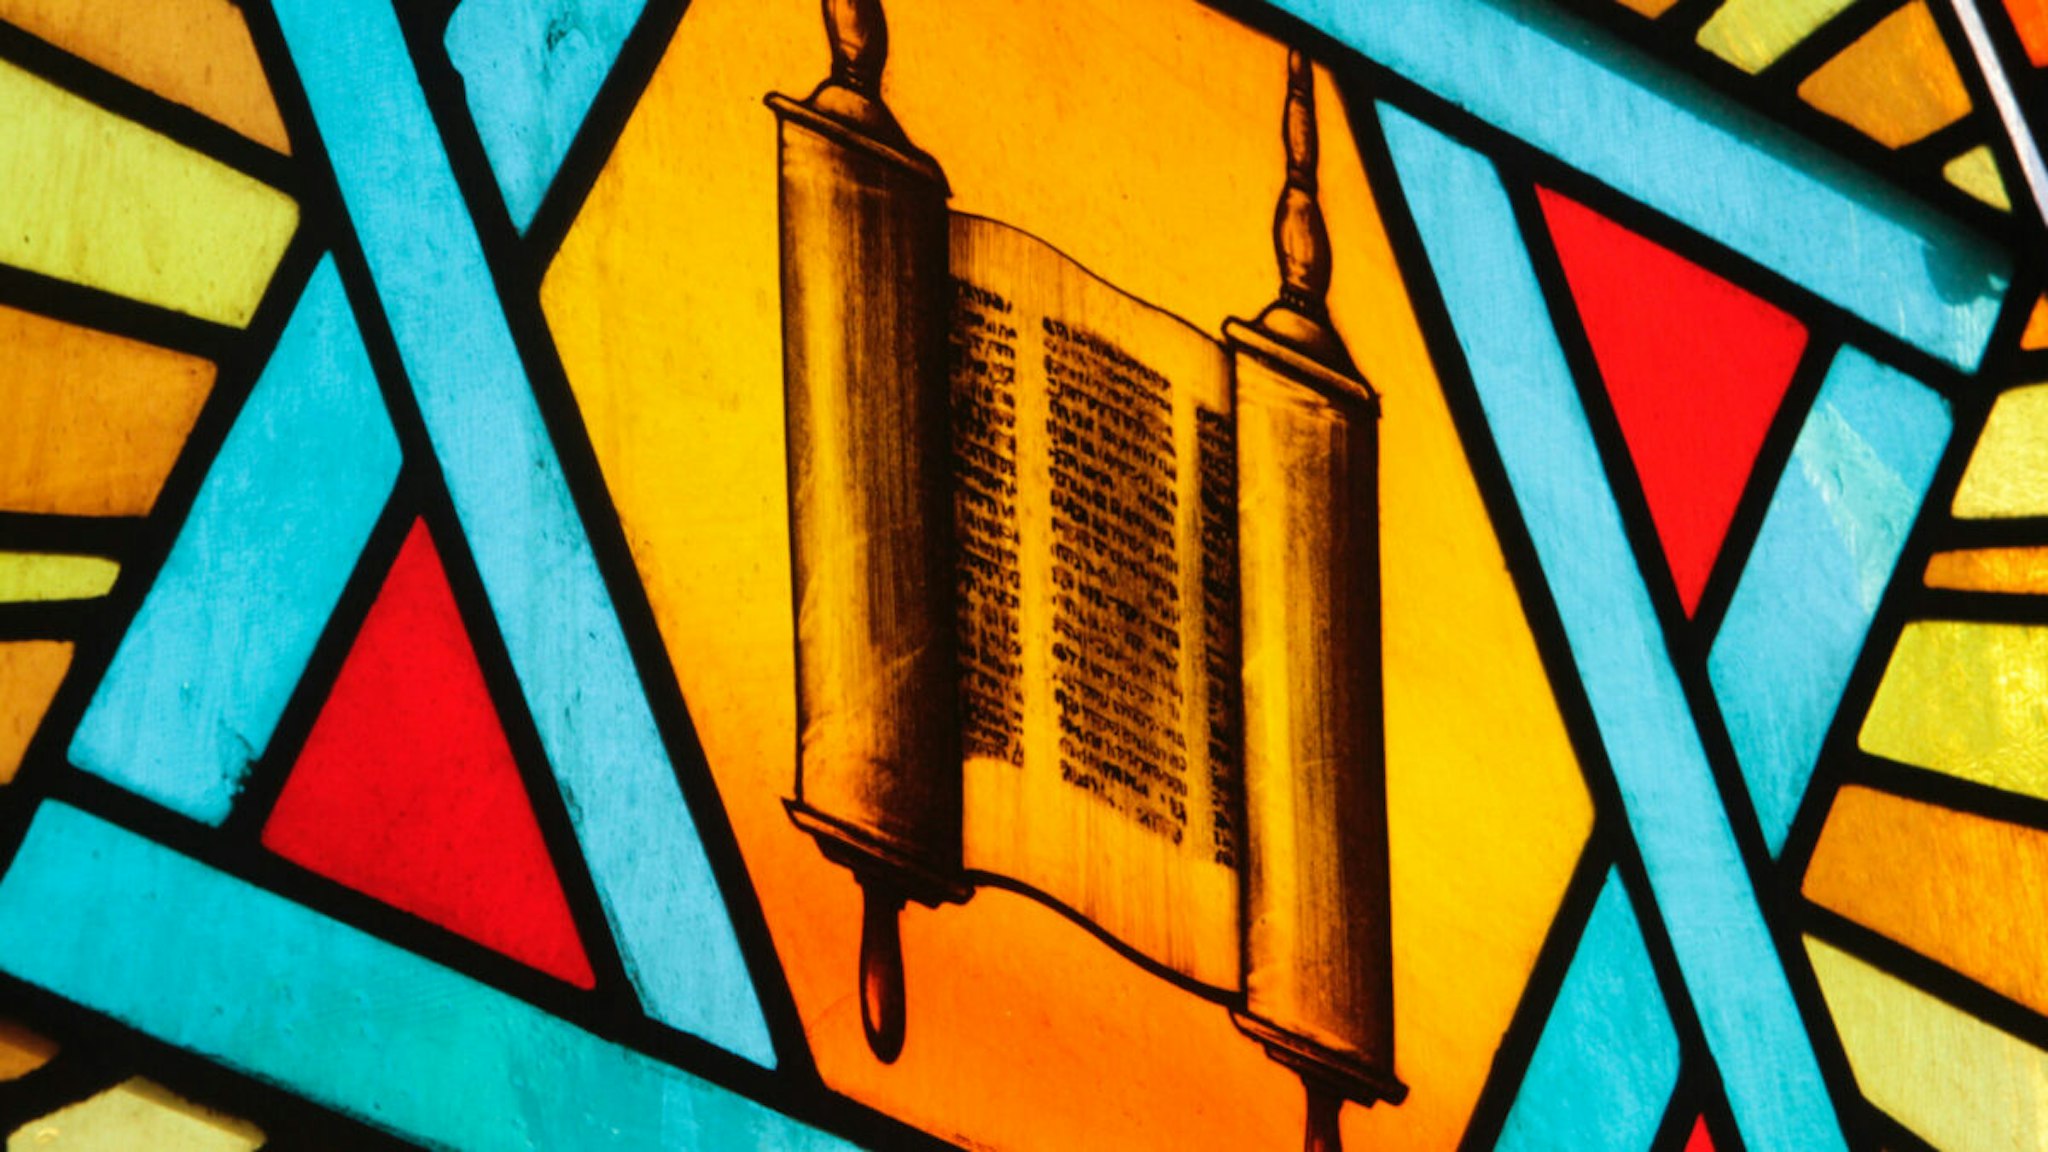 Stained glass window depicting a Torah scroll.